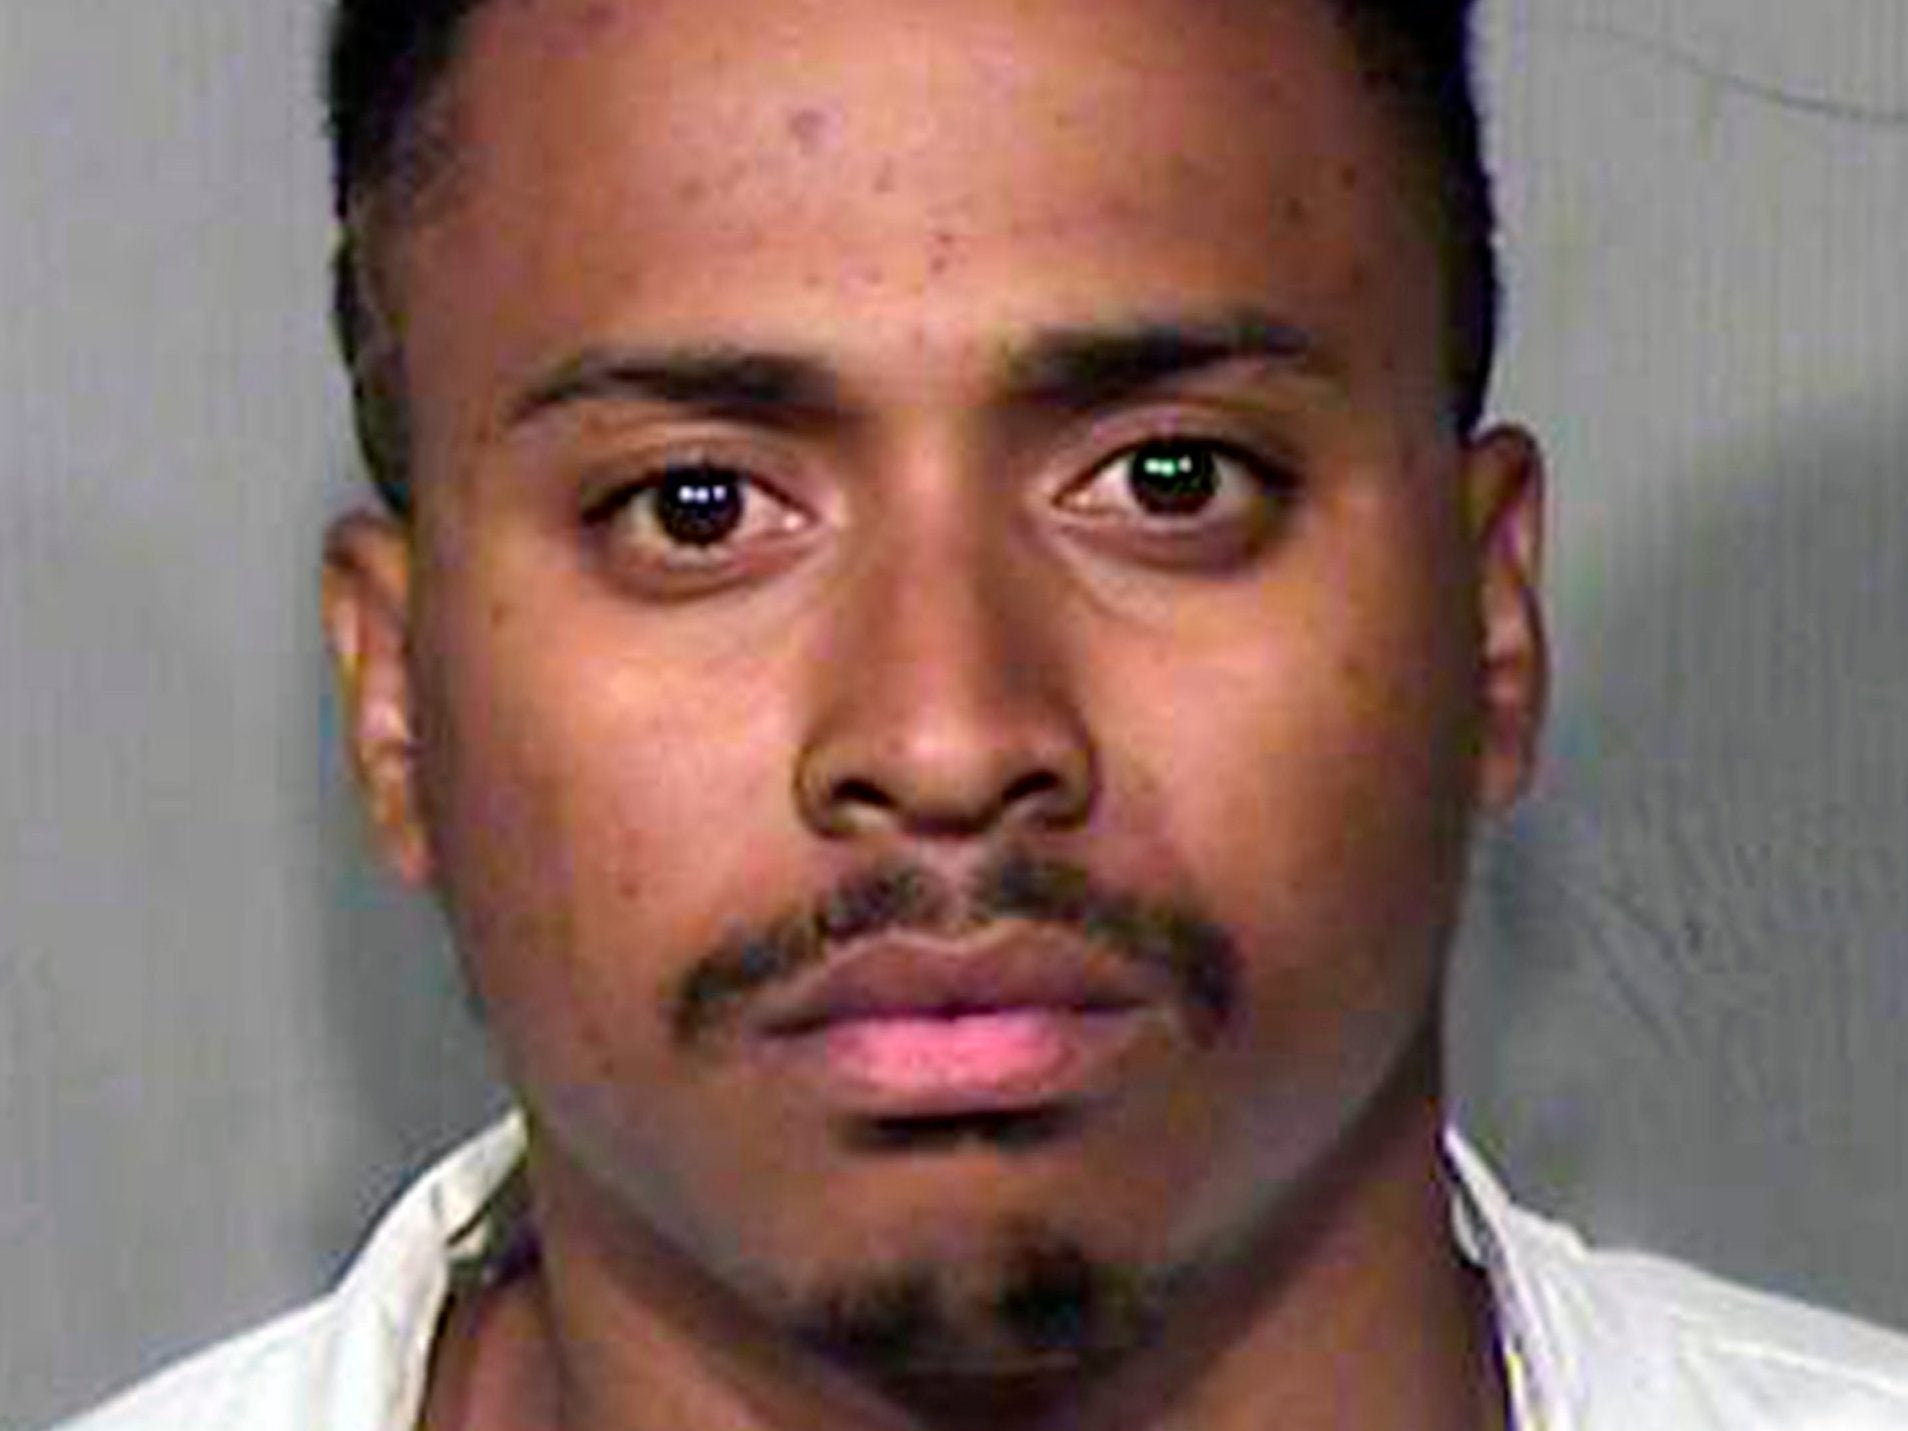 Phoenix shooting: Three-year-old girl hid under bed as father killed mother and sisters